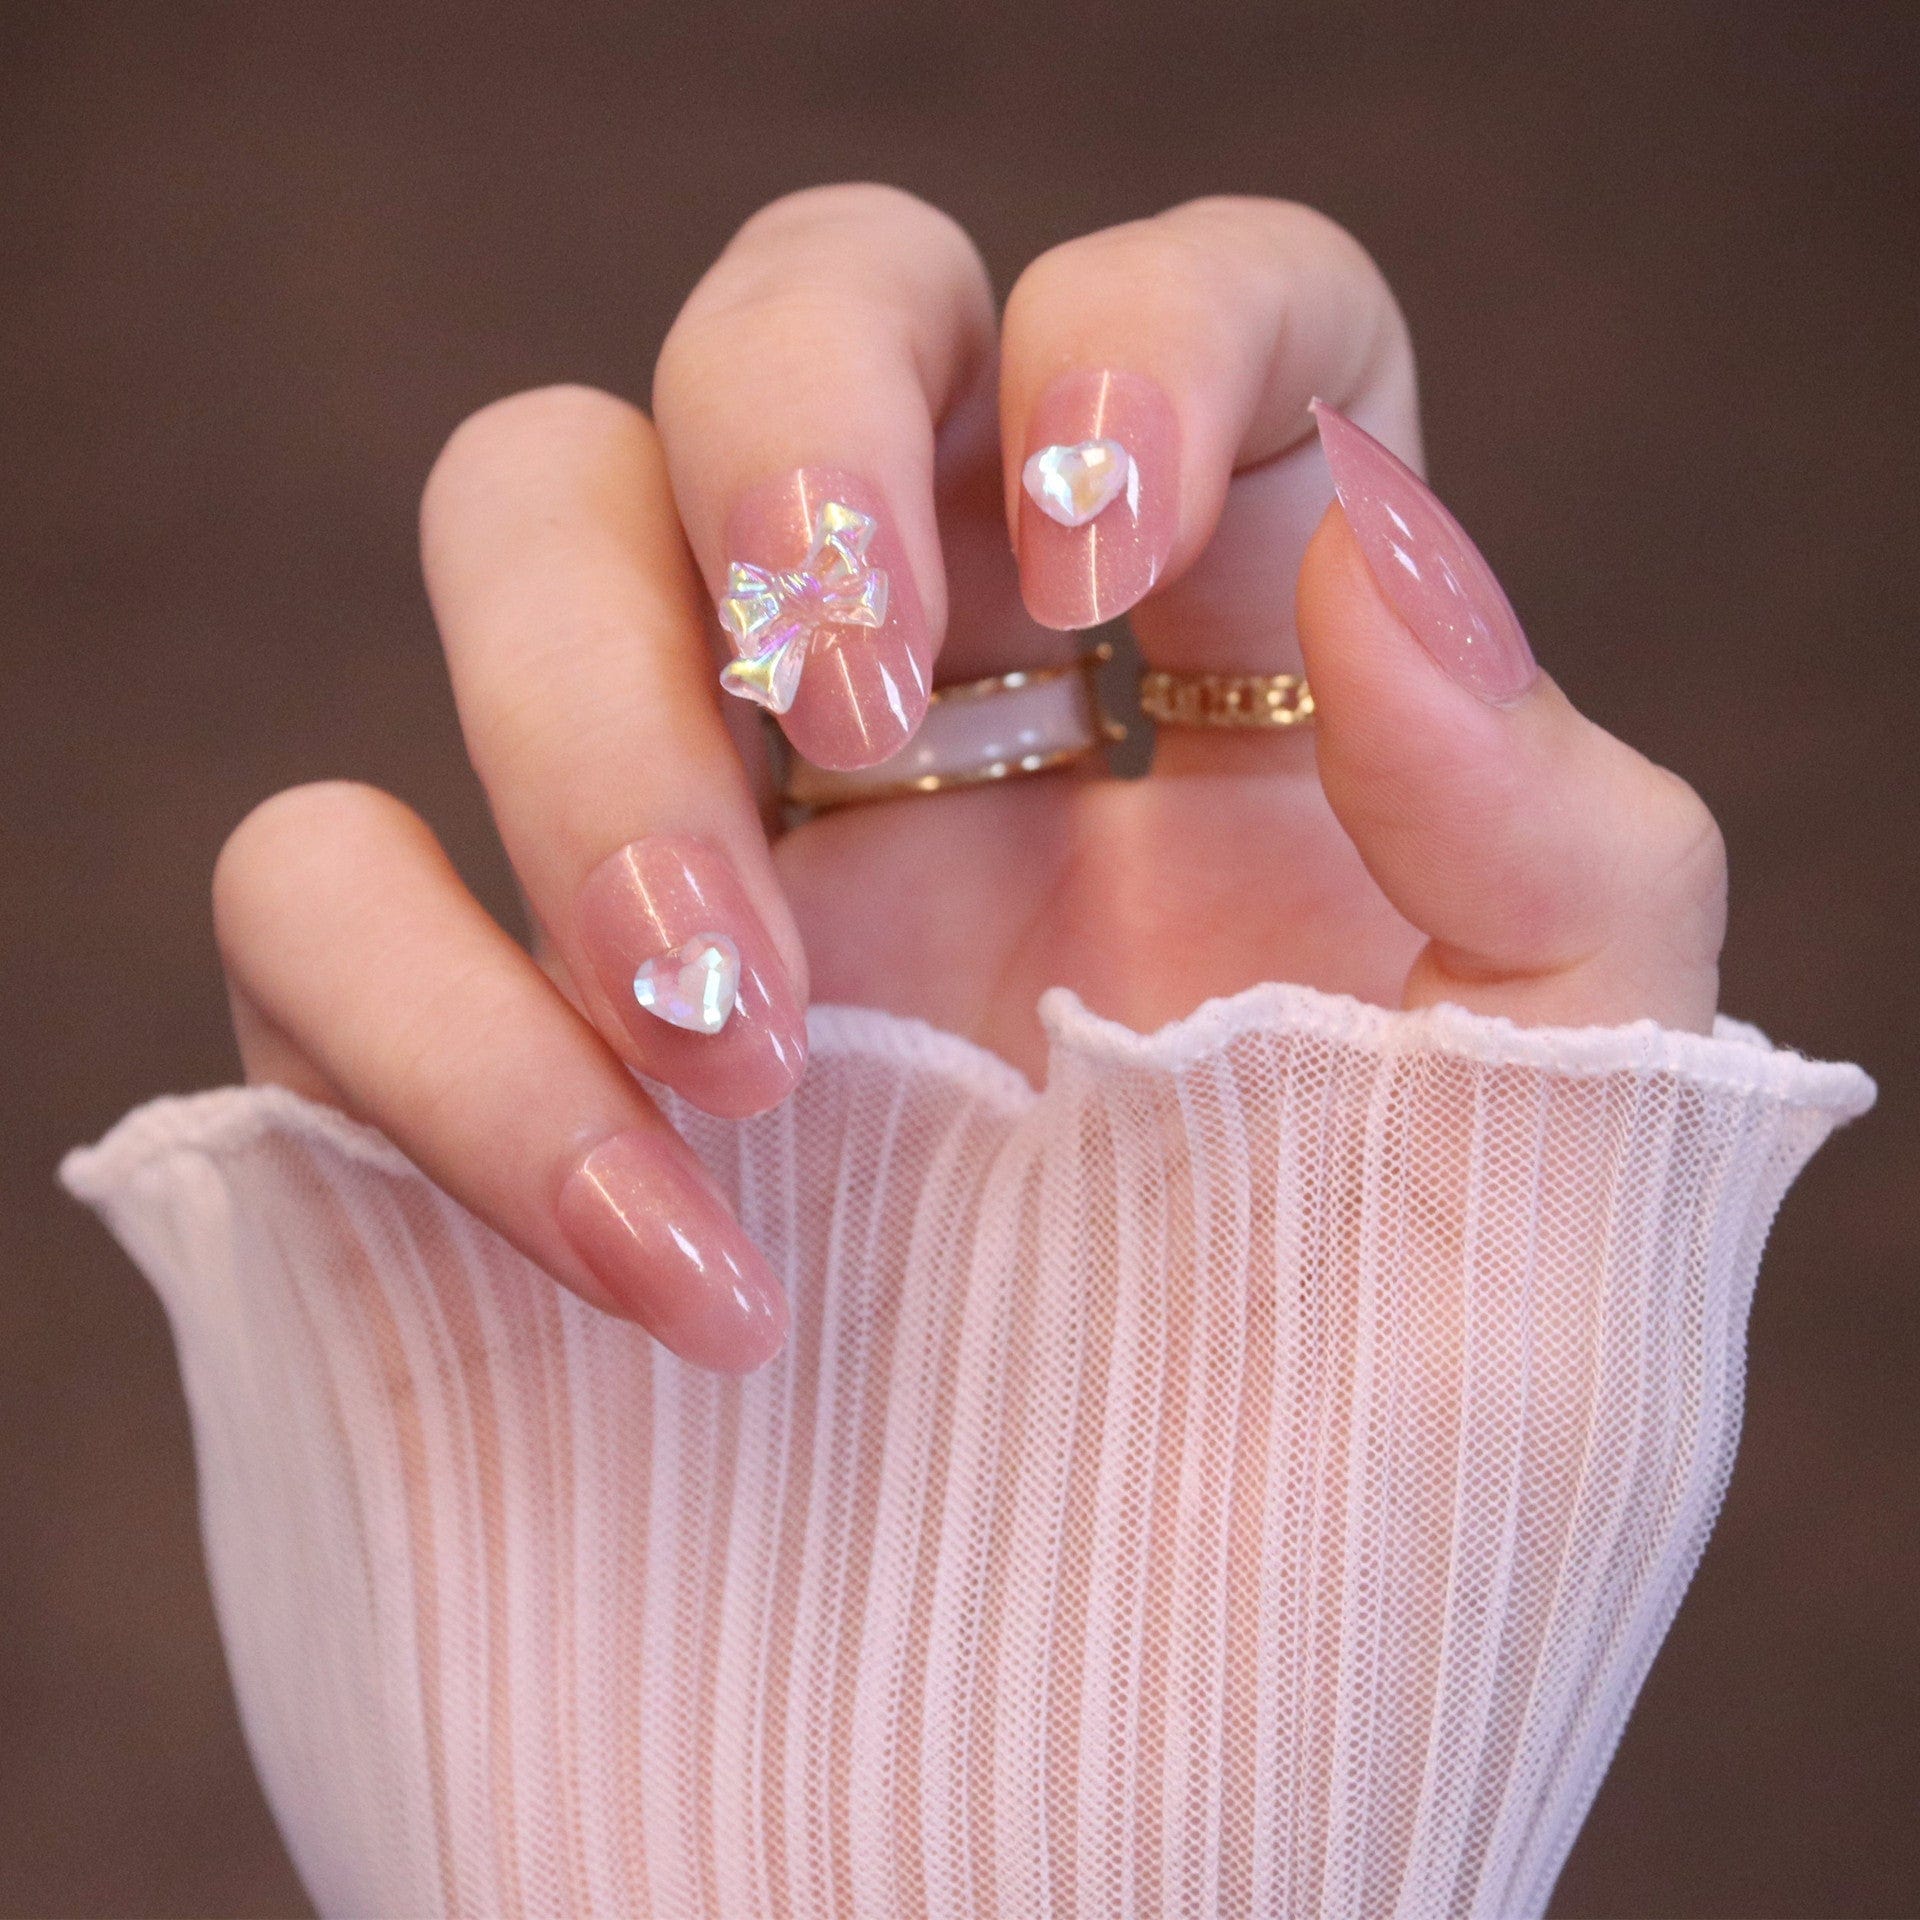 Medium Rounded Light Pink Press On Nails with Iridescent Bow and Heart